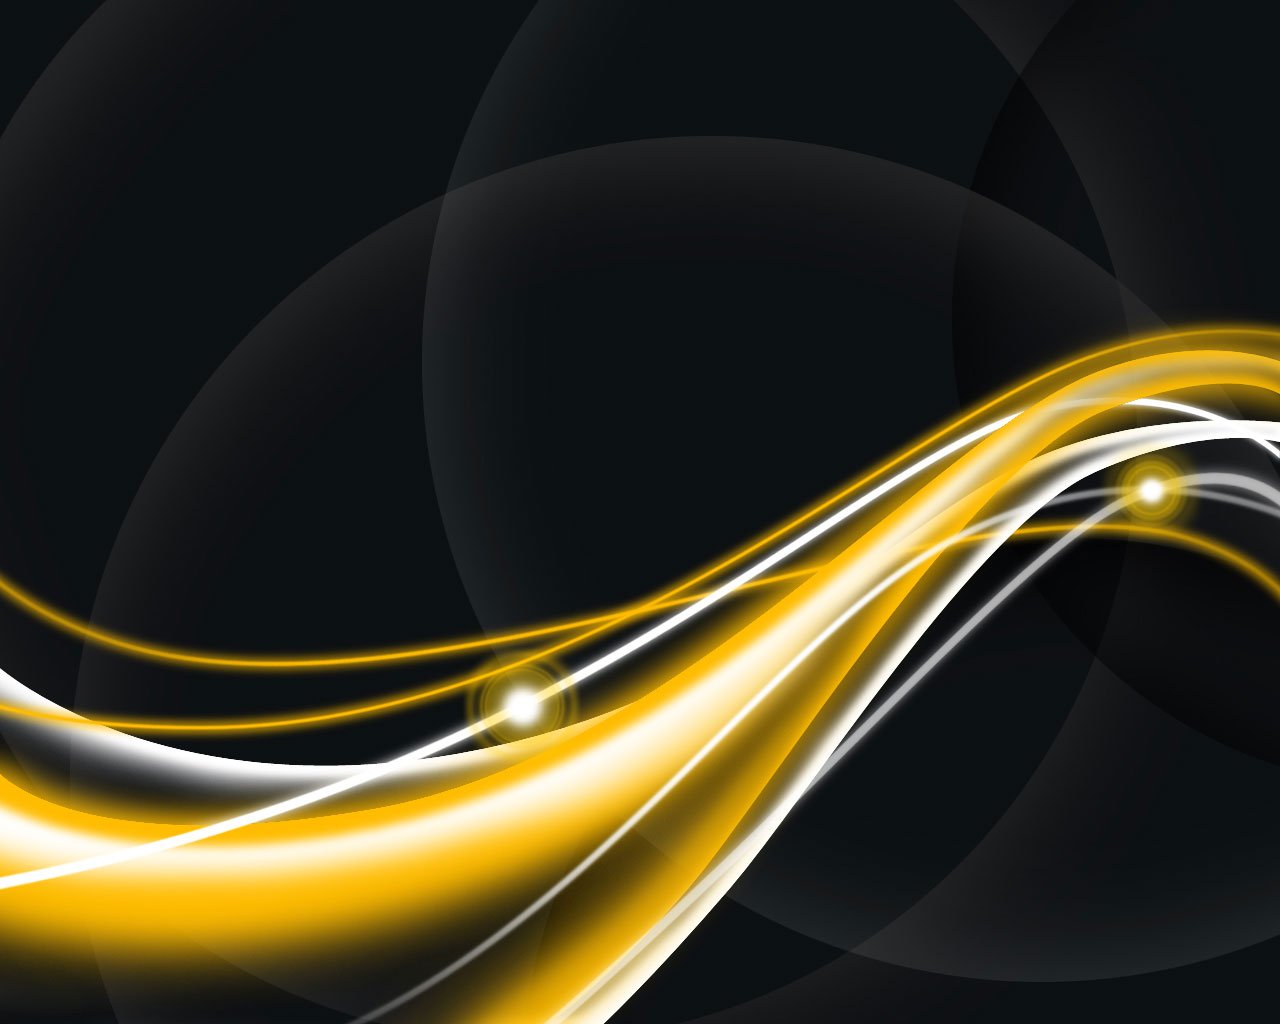 Black And Gold Abstract Wallpaper Black and Gold Abstract